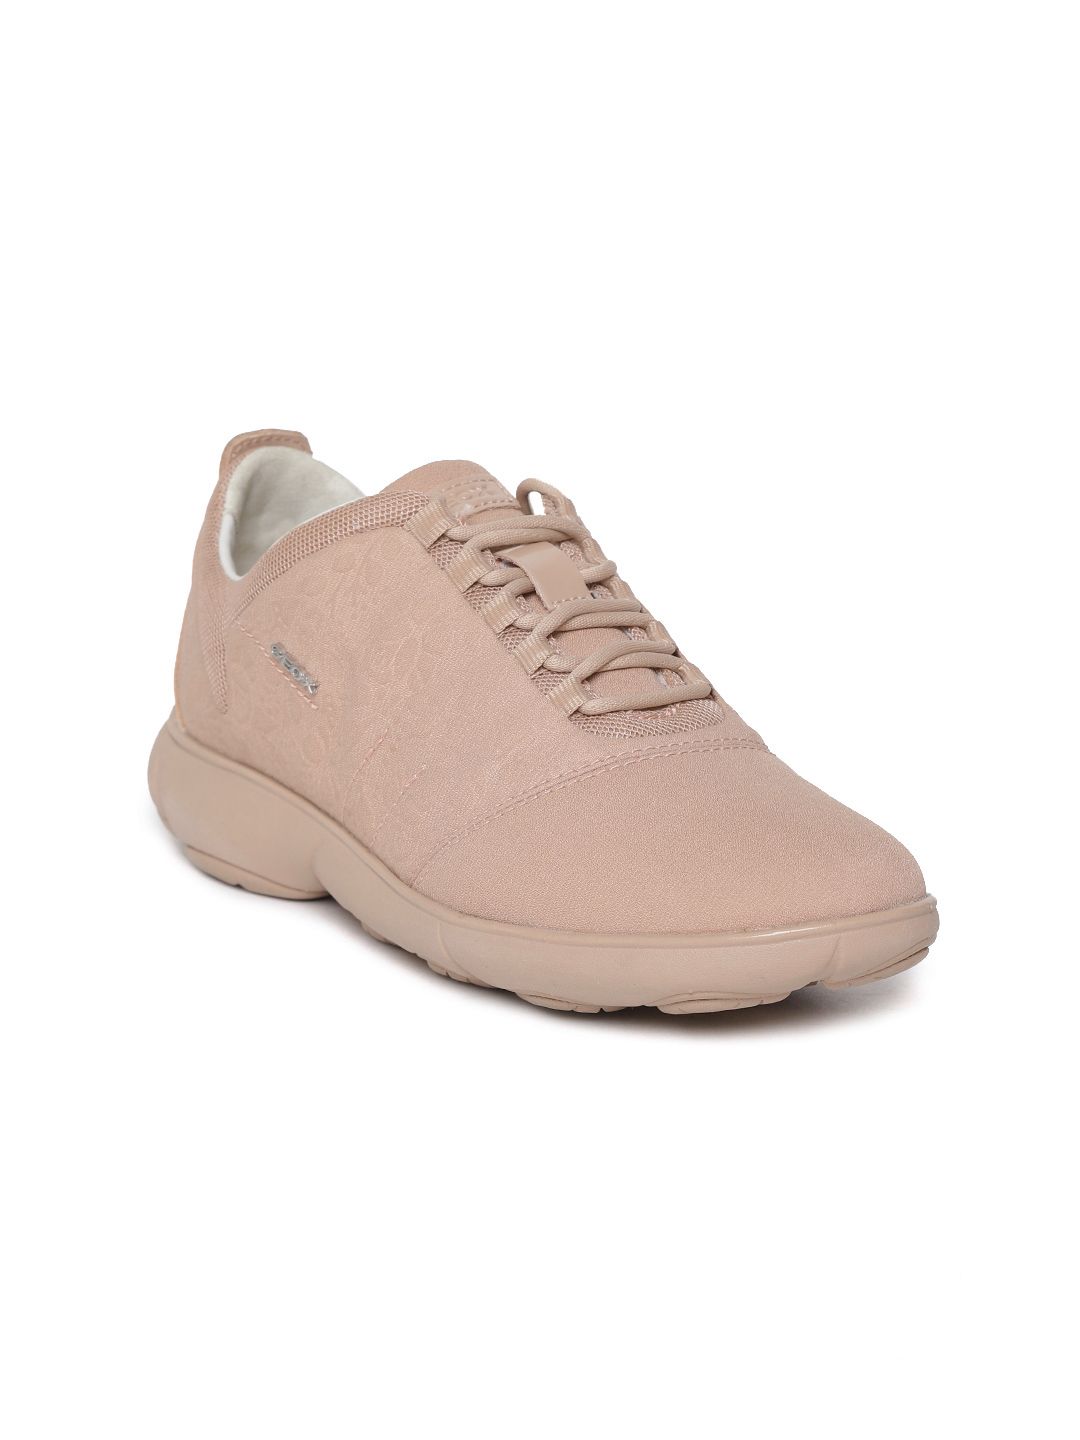 Geox Women Dusty Pink Textured Sneakers Price in India